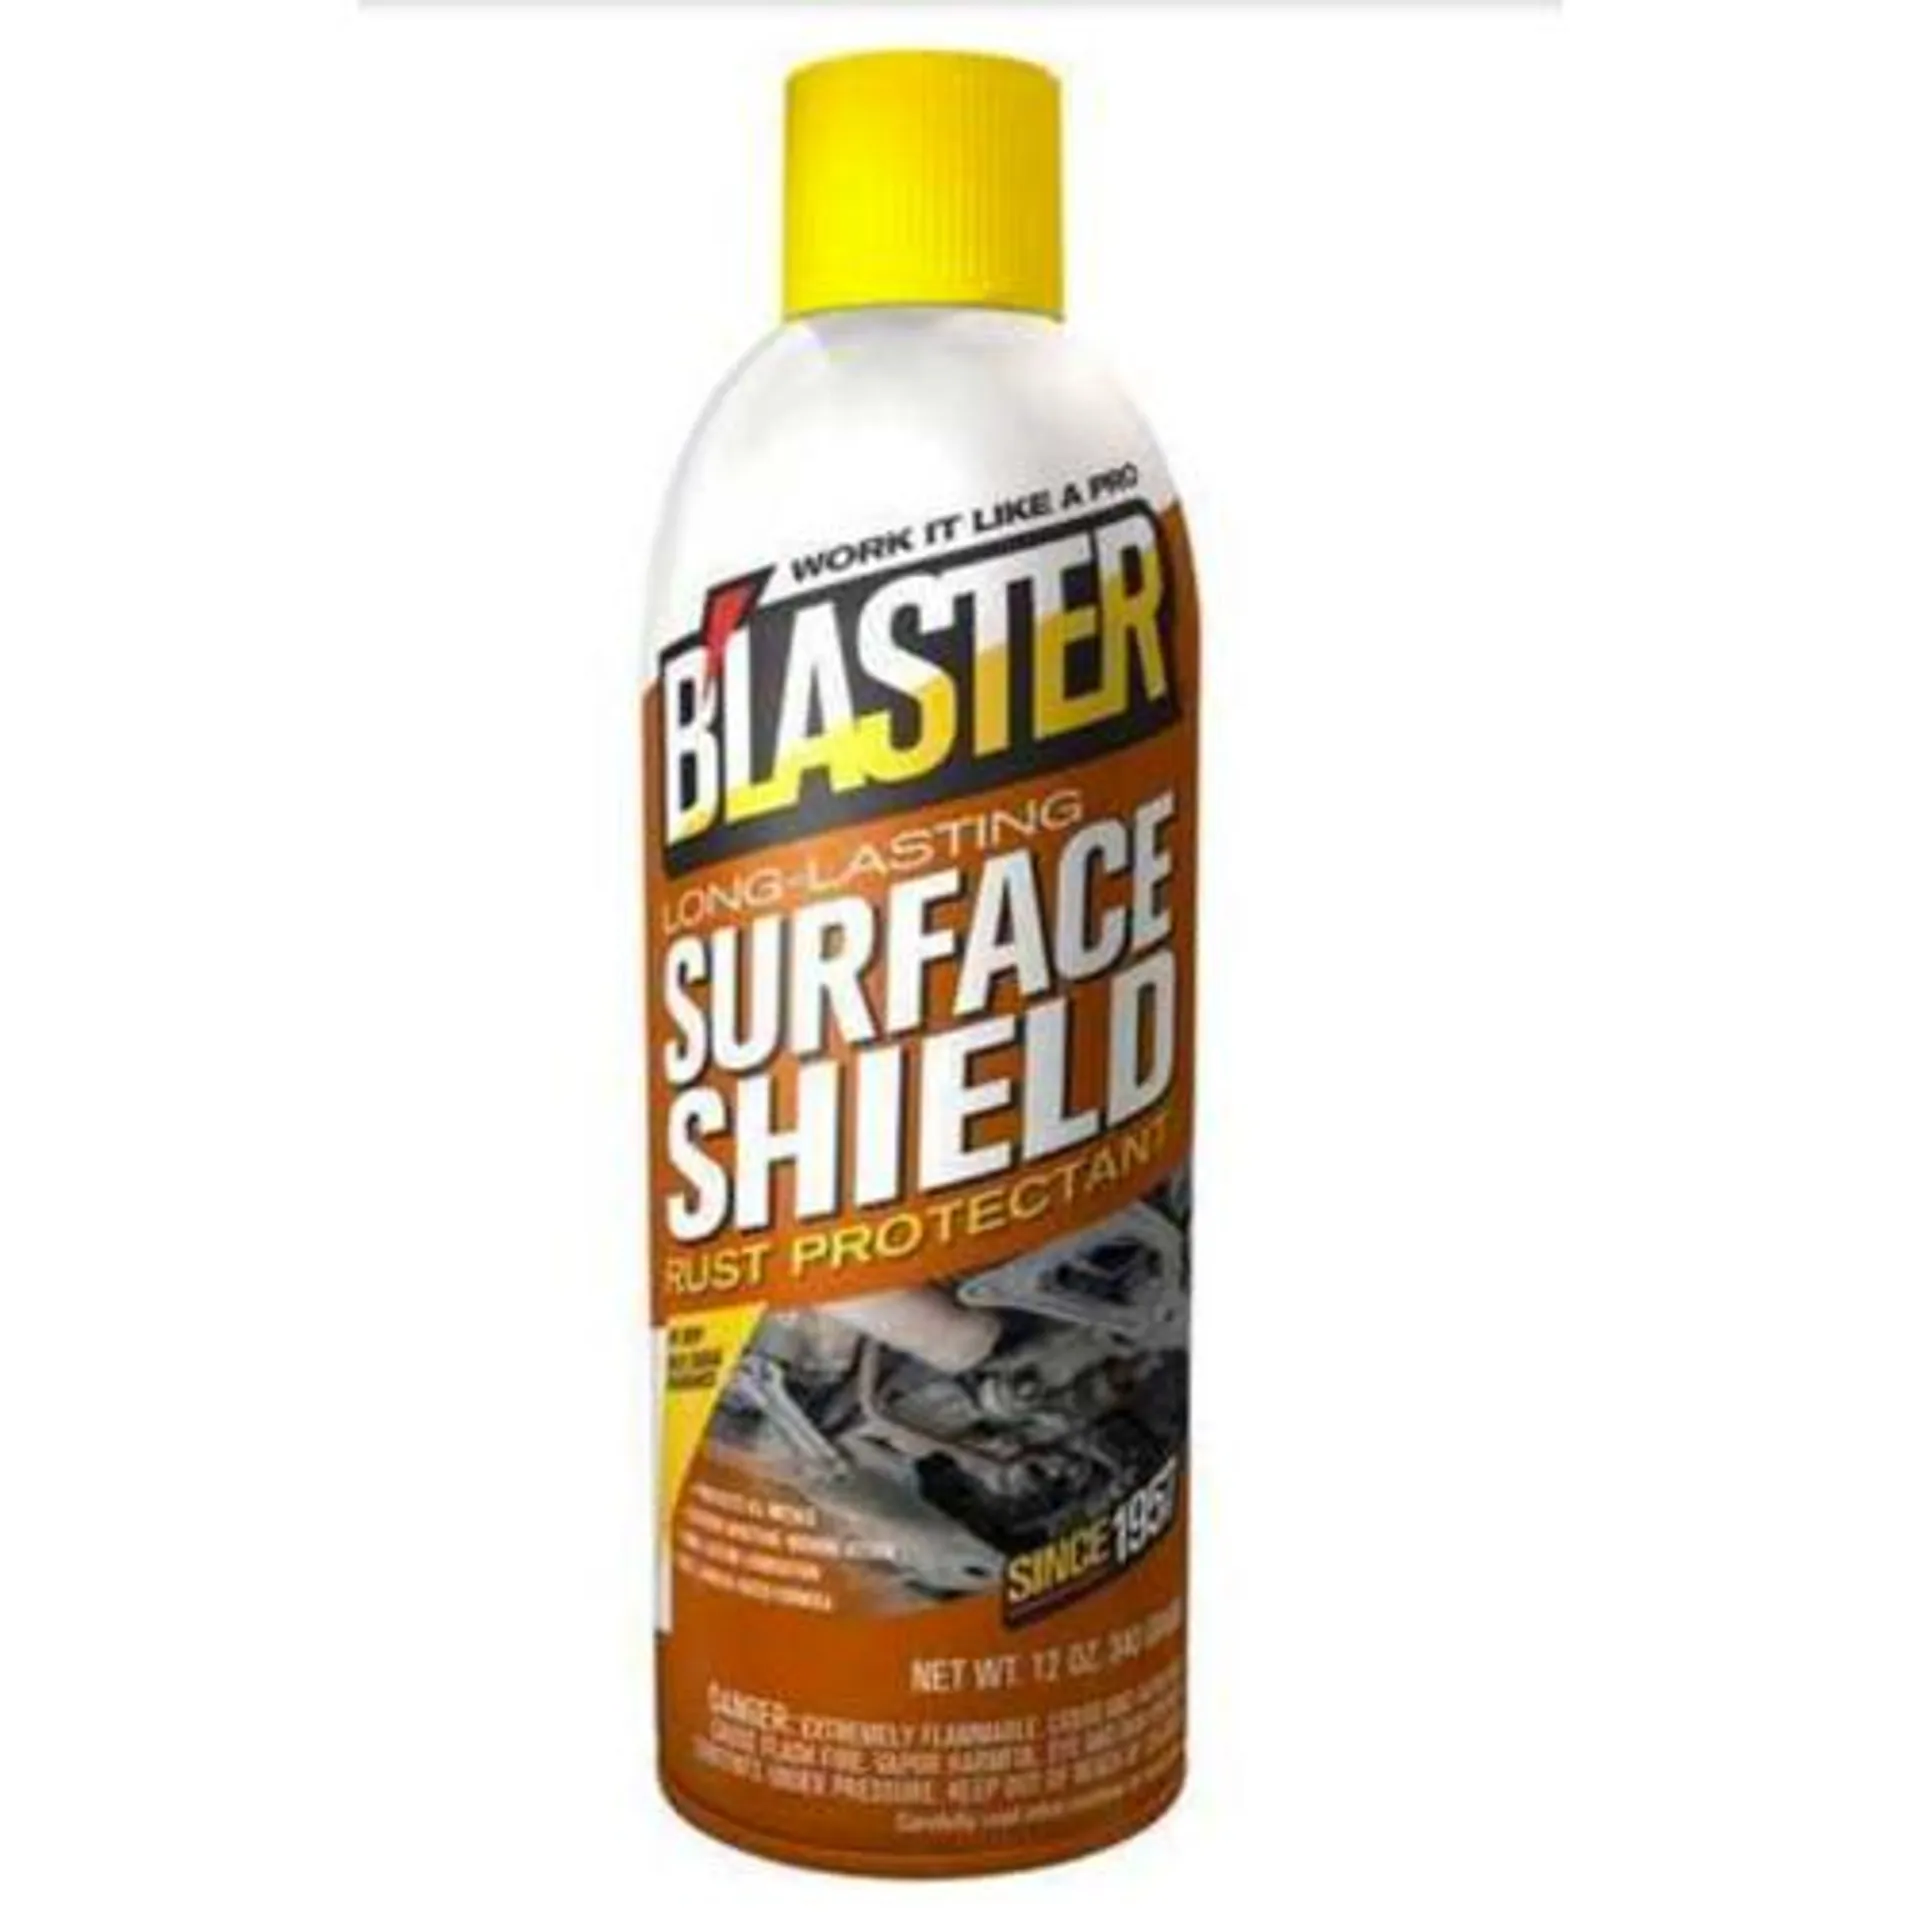 Blaster Surface Shield Rust Protection